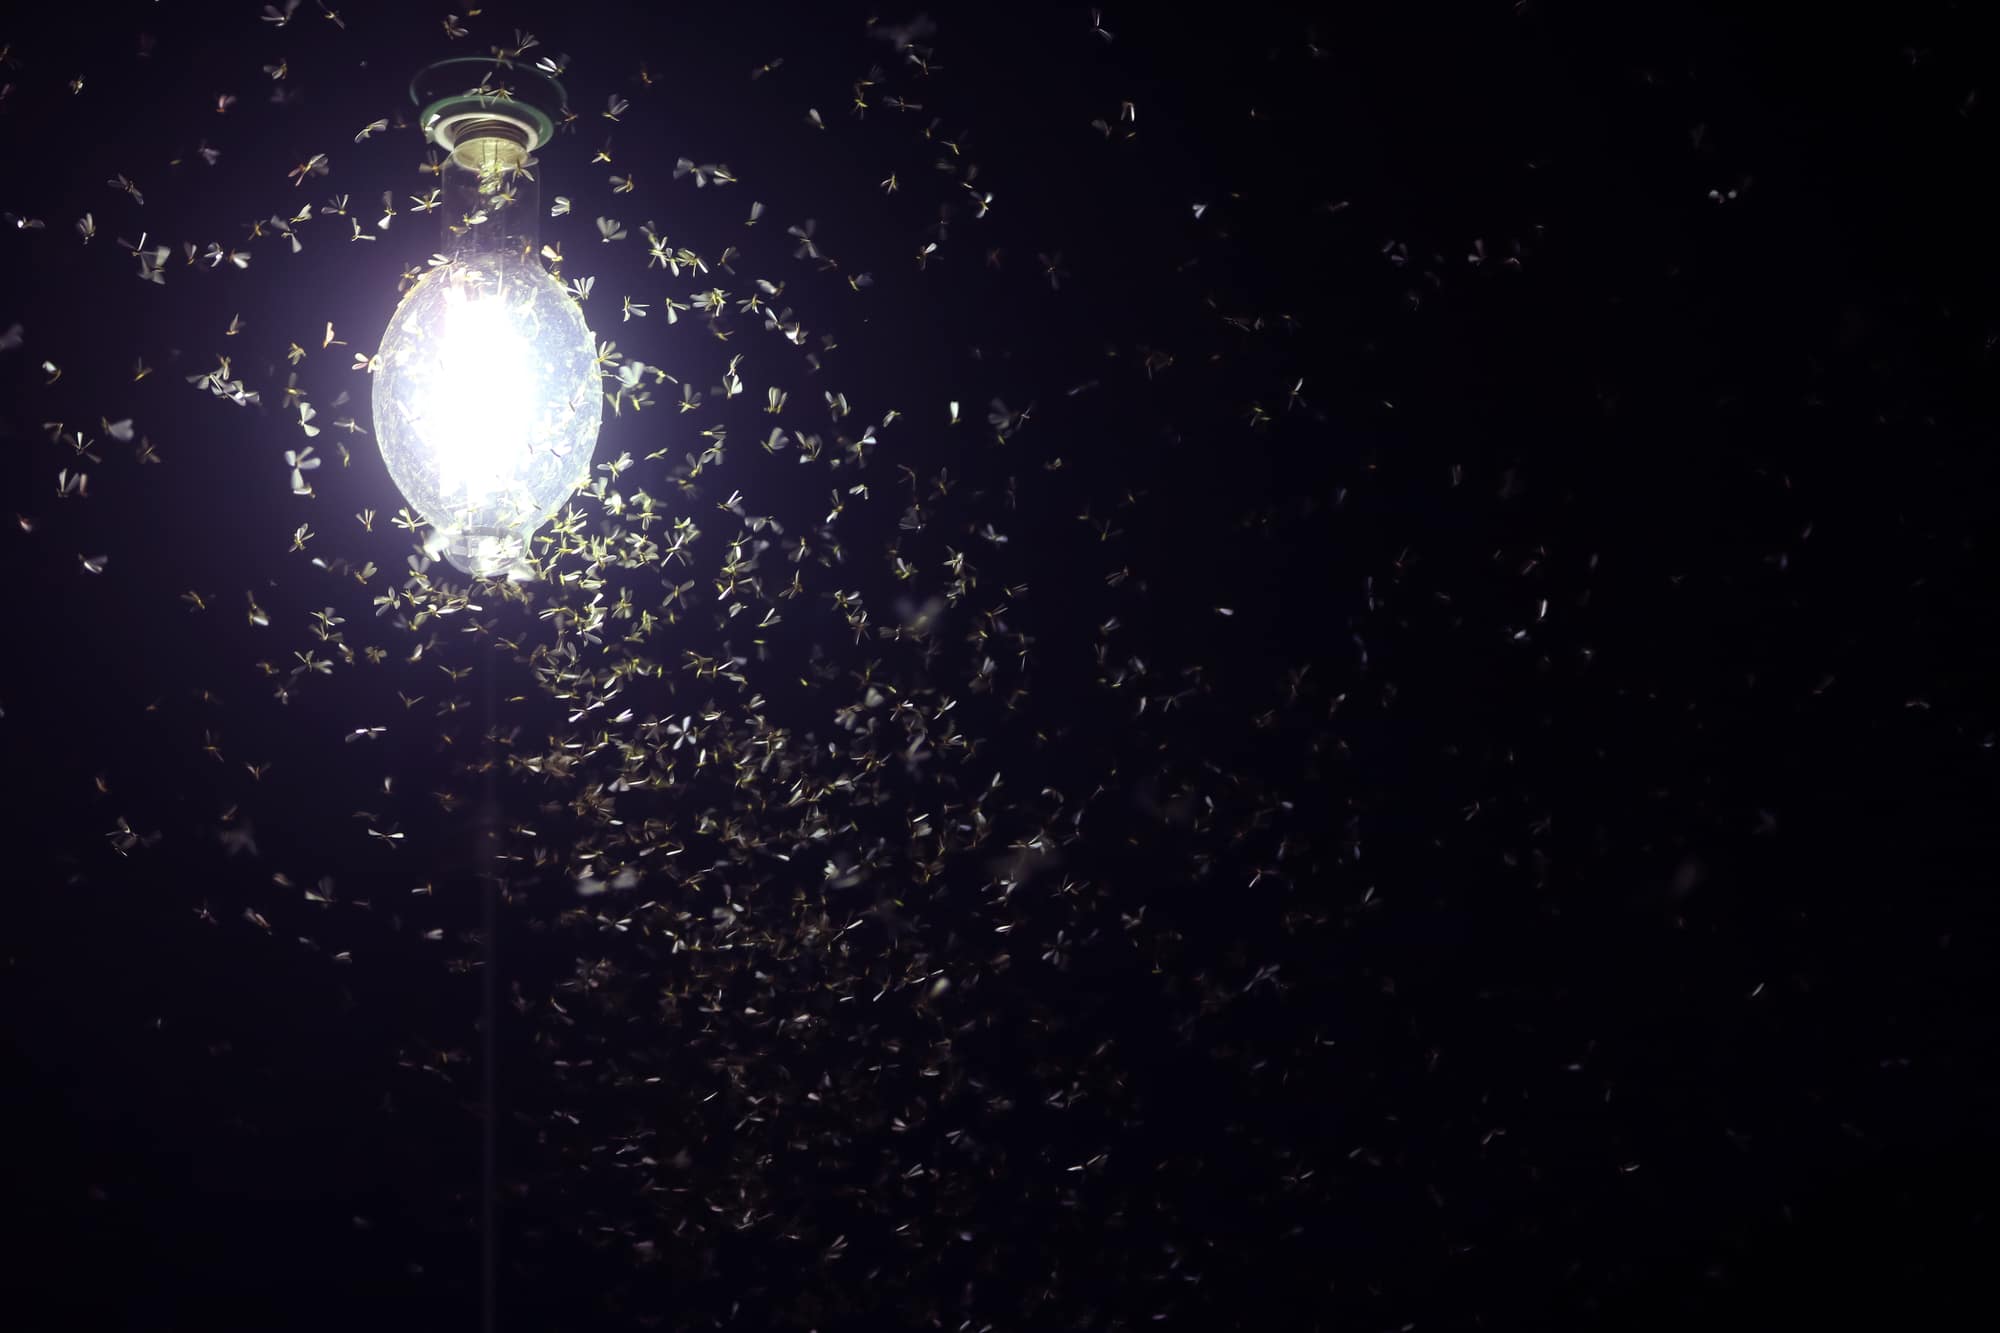 insects attracted to light